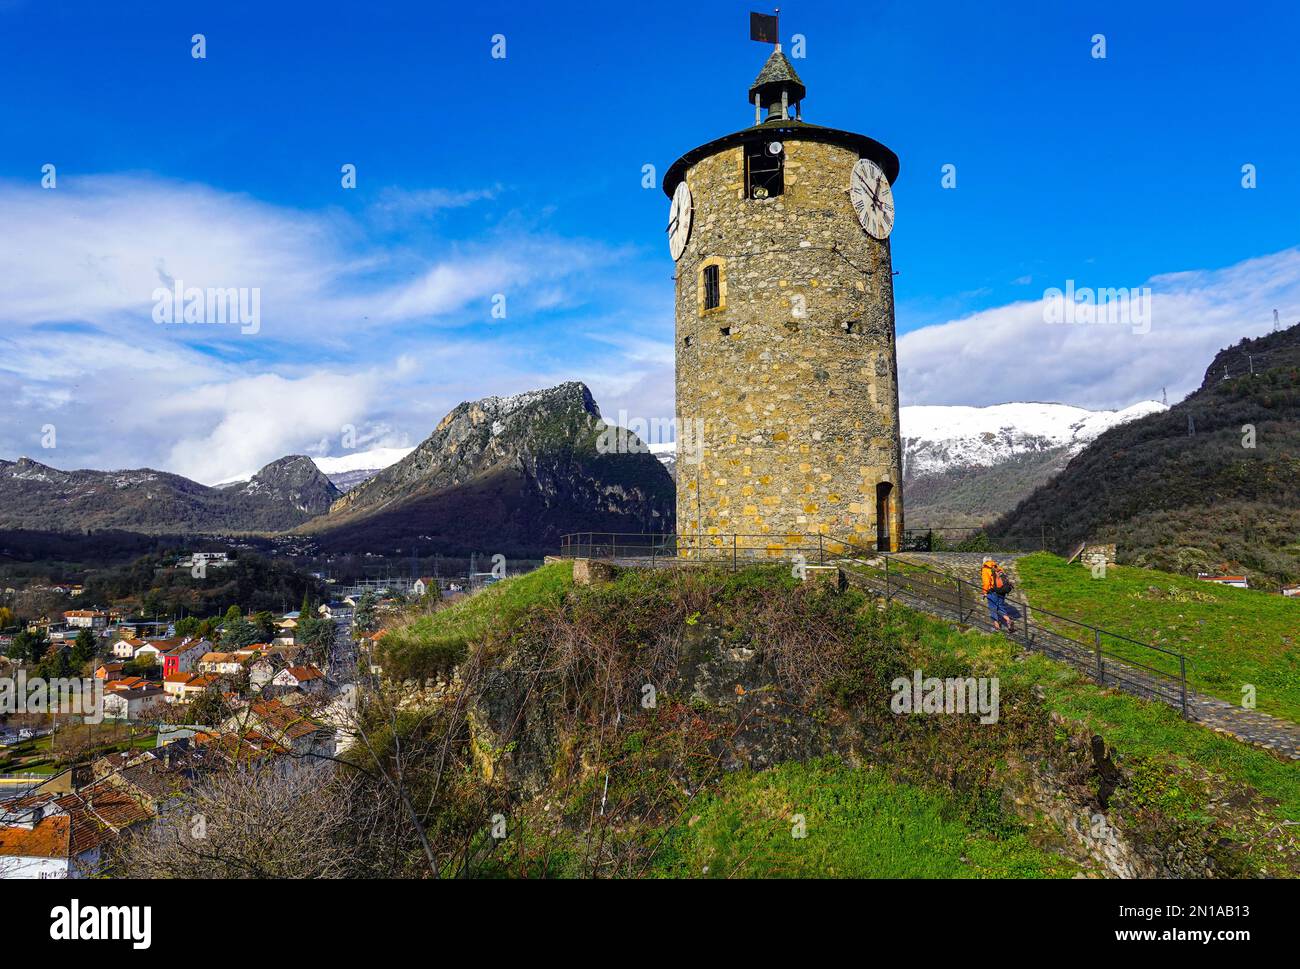 Clocktower above in Tarascon sur Ariege, French Pyrenees, The Ariege, France with snowy mountains Stock Photo